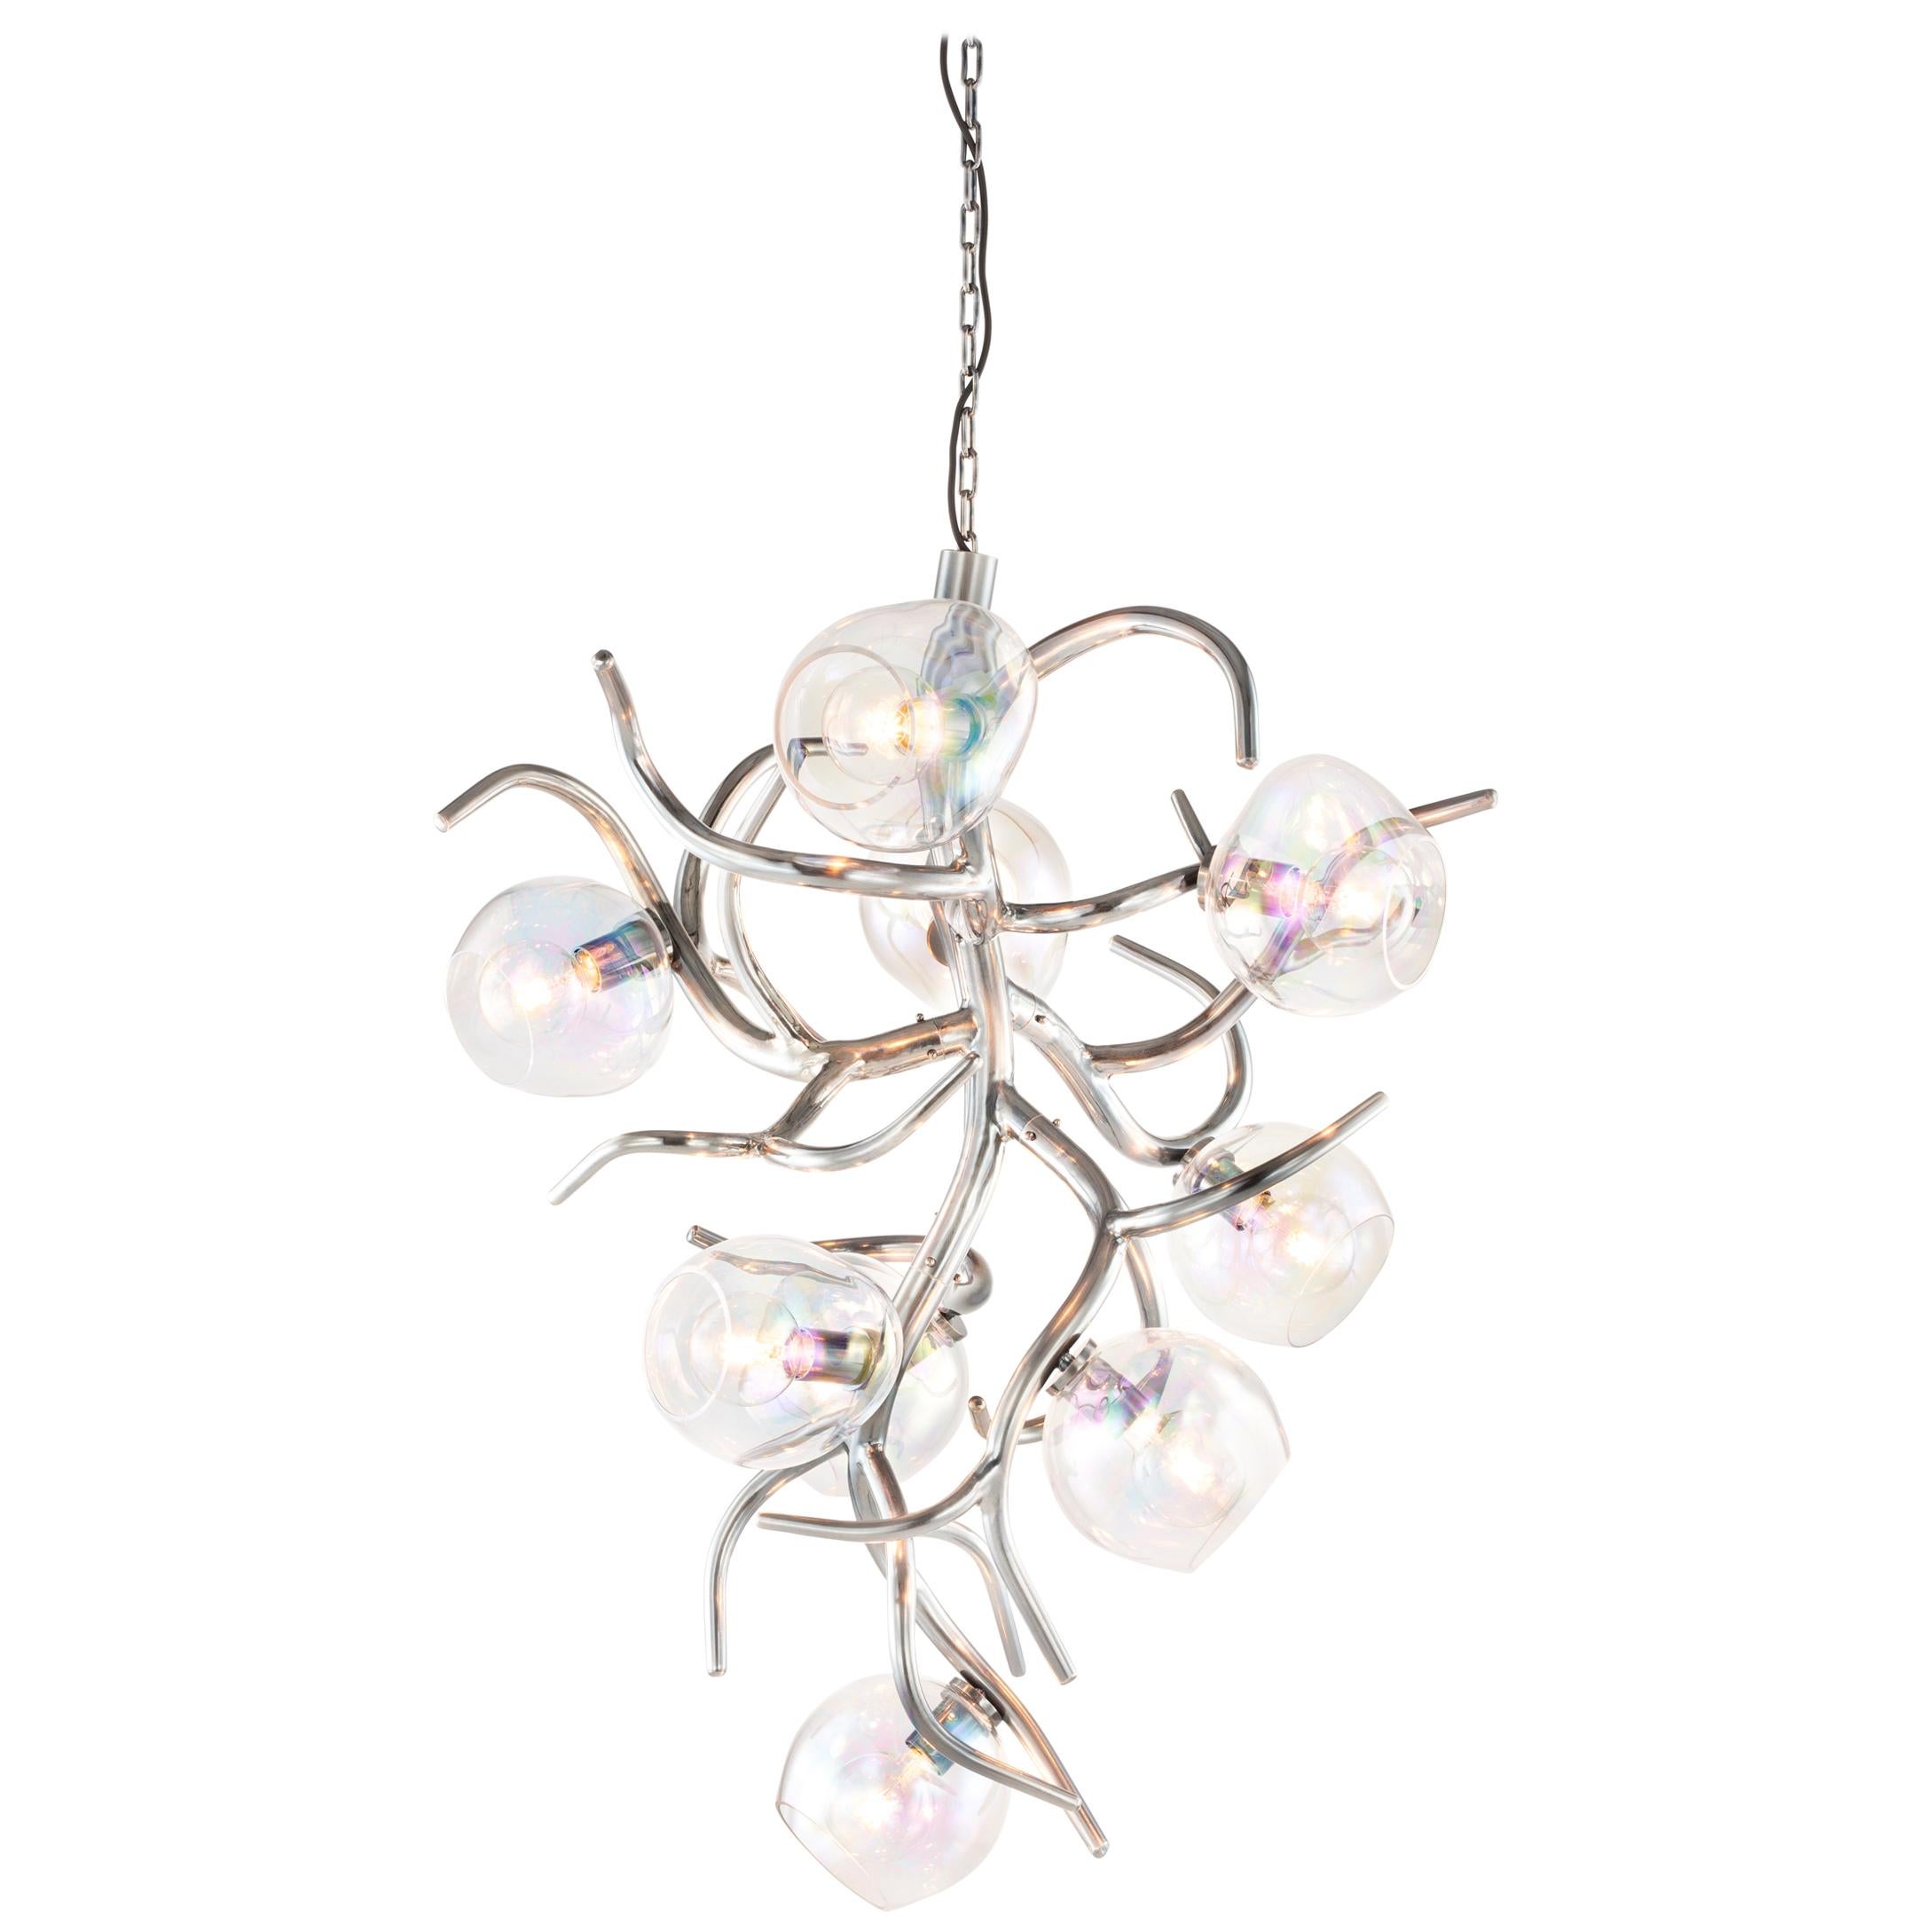 Modern chandelier with colored glass in a nickel finish - Ersa collection For Sale